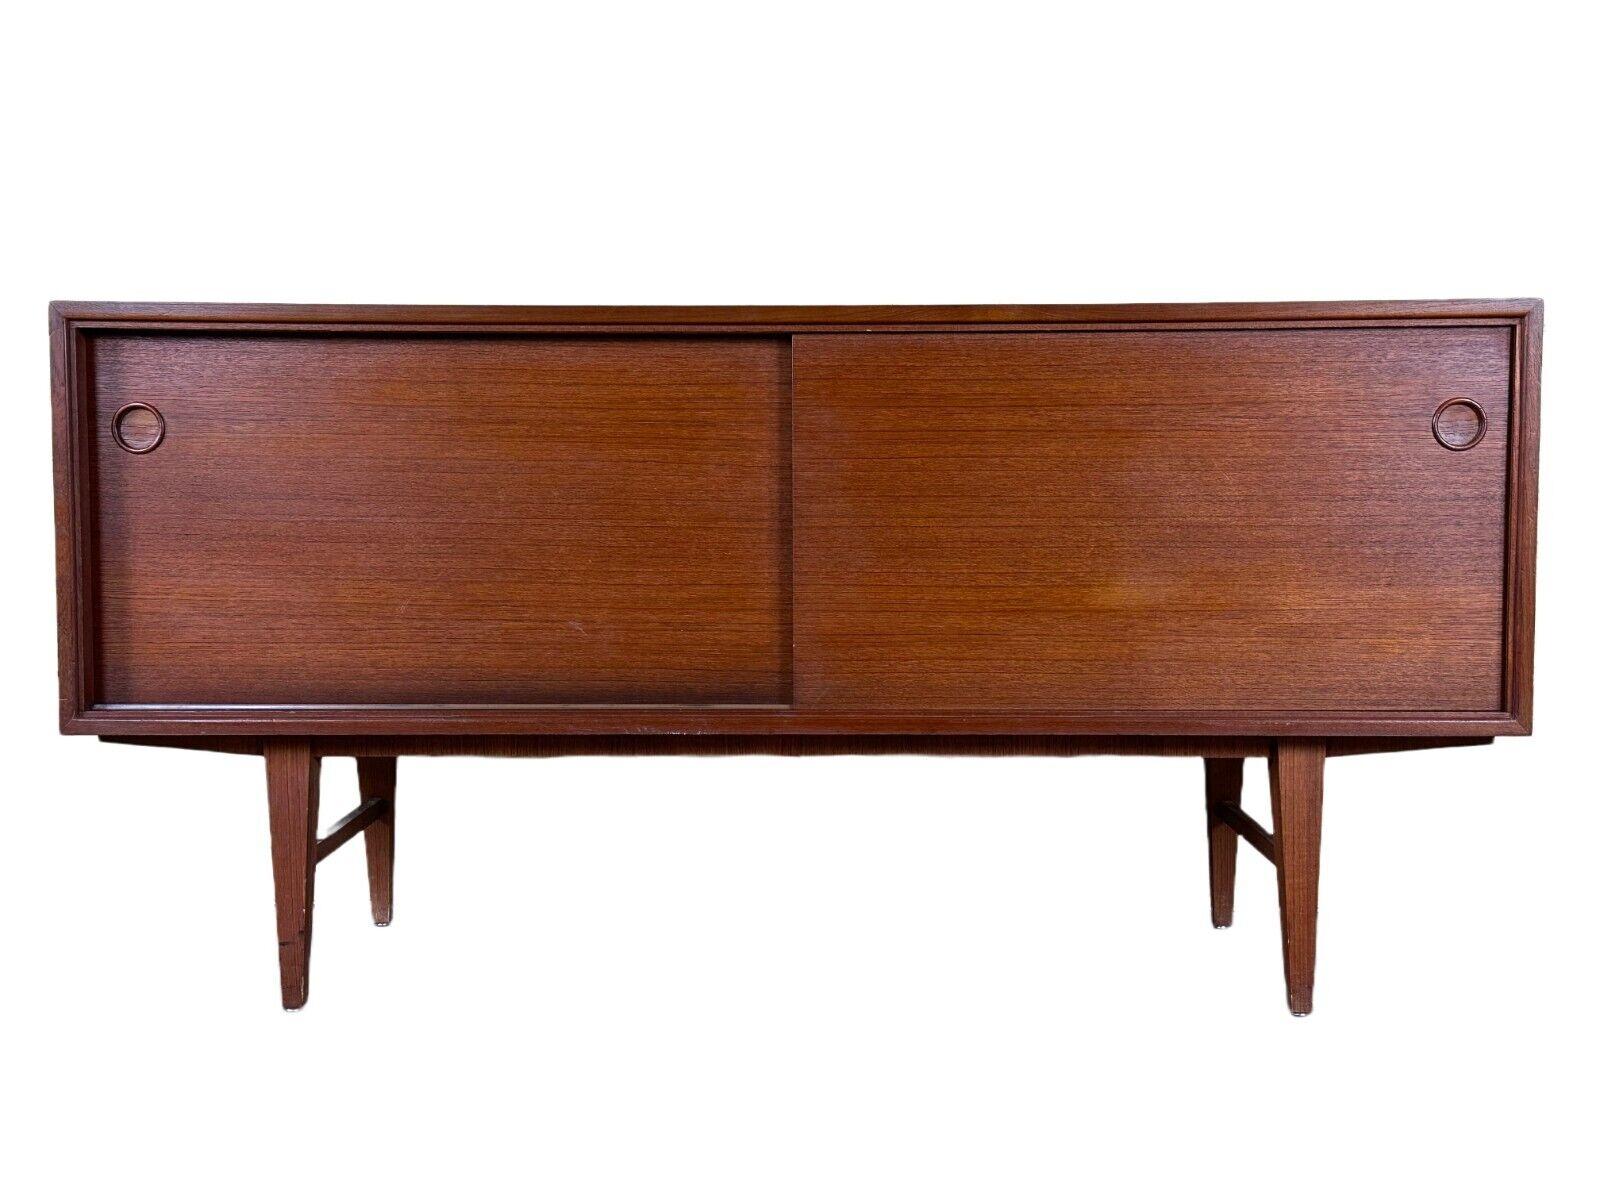 60s 70s teak sideboard Credenza cabinet Danish Modern Design Denmark 70s

Object: sideboard

Manufacturer:

Condition: good

Age: around 1960-1970

Dimensions:

Width = 153cm
Depth = 47cm
Height = 75cm

Other notes:

The pictures serve as part of